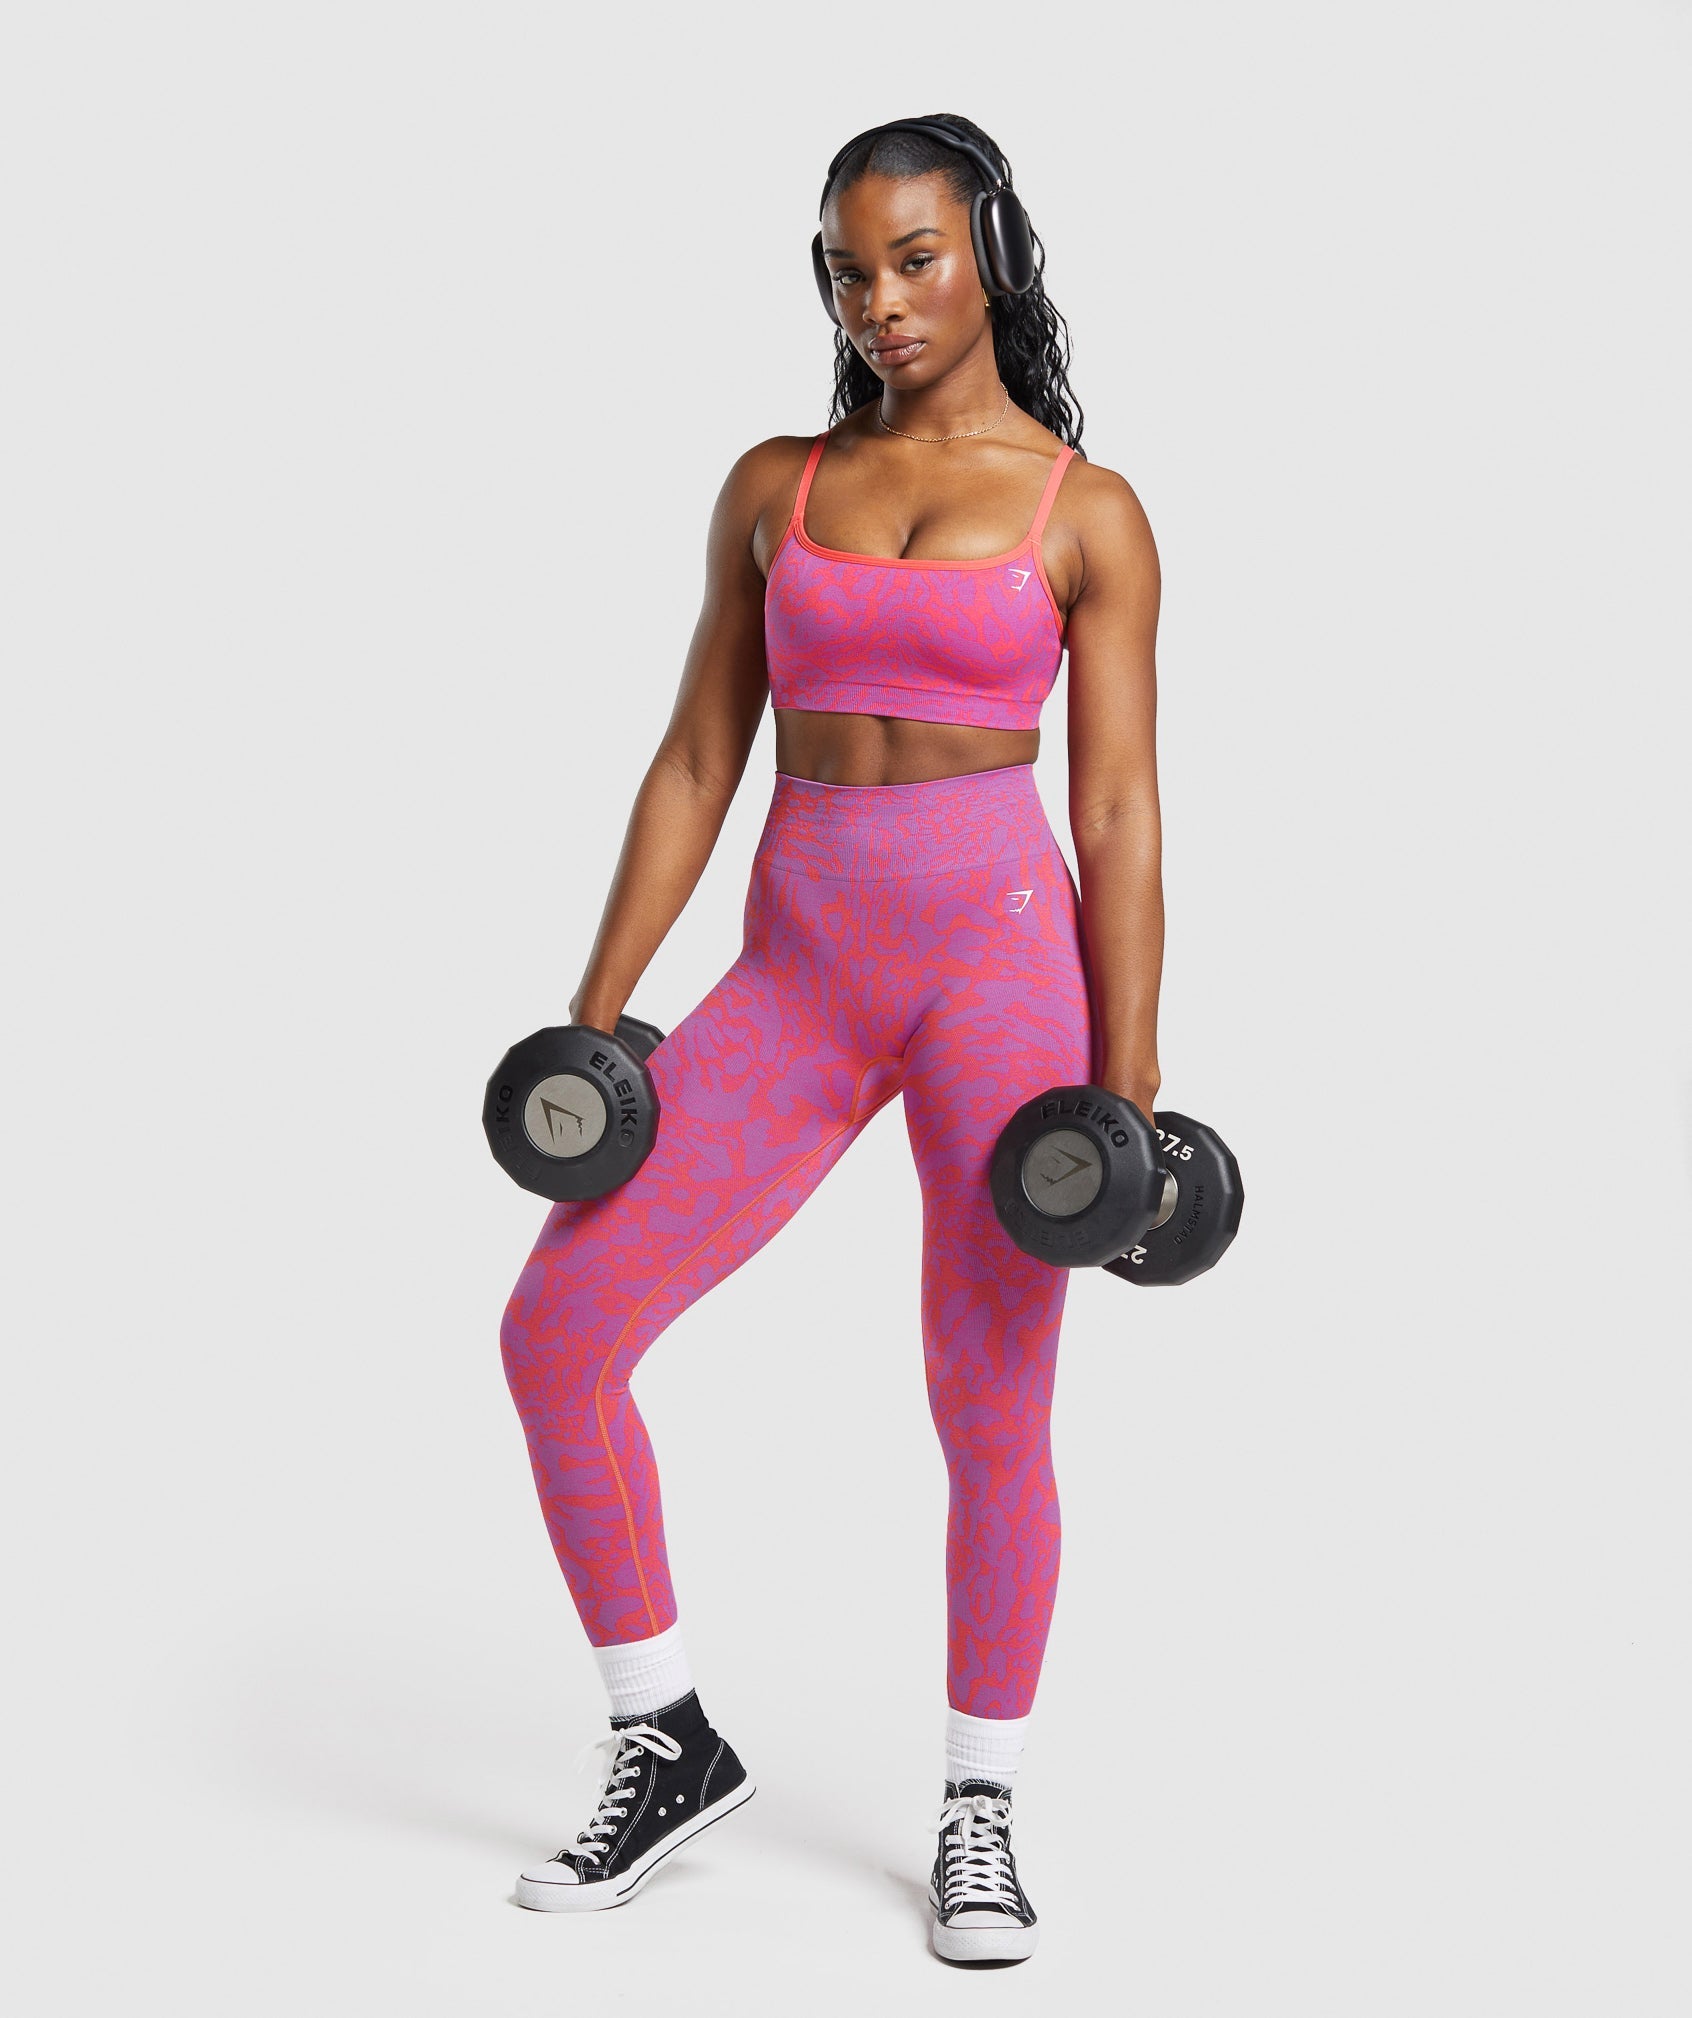 Adapt Safari Seamless Leggings in Shelly Pink/Fly Coral - view 7